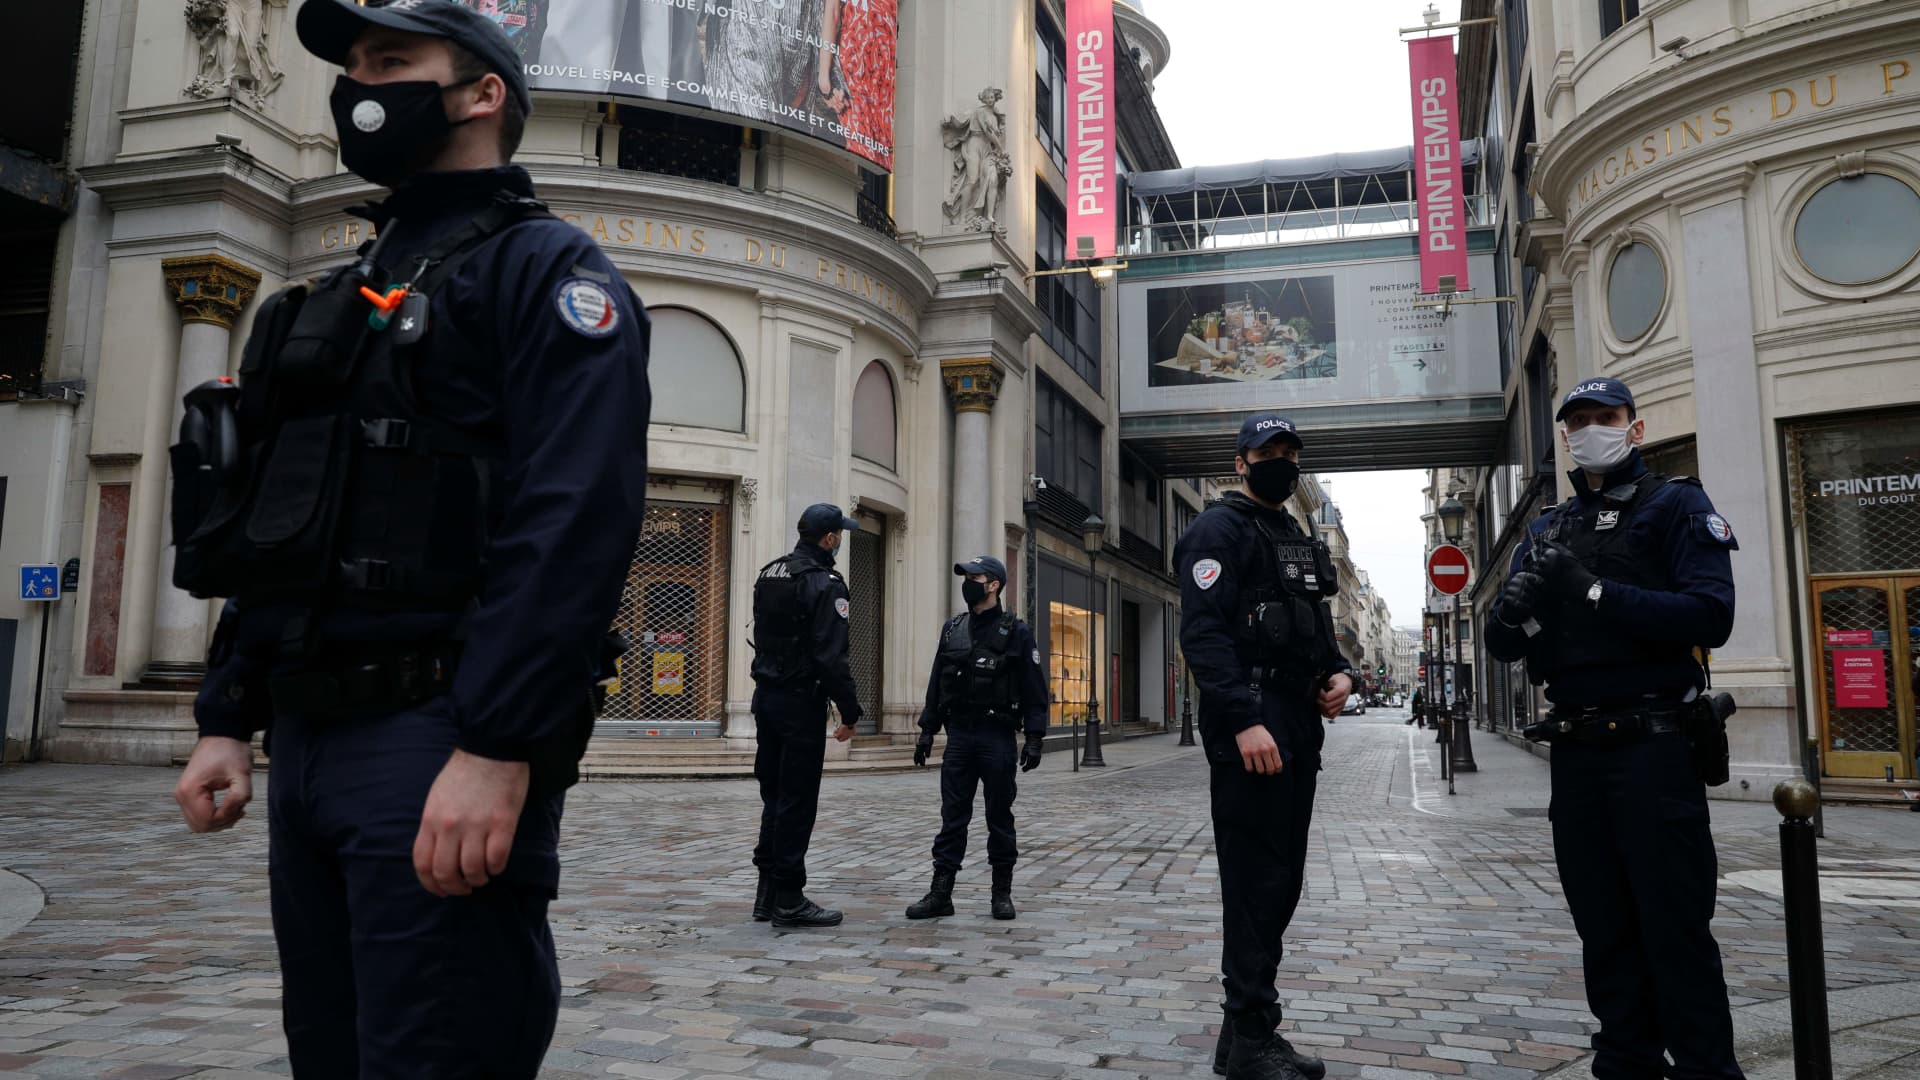 Policemen patrol near Le Printemps shopping center in Paris on January 21, 2021, as big shopping centres are closed as a measure taken to curb the spread of the Covid-19. - France closed its borders to all non-EU travellers except those on essential trips, and closed big shopping centres of 20.000m2 or more, except those selling food. (Photo by GEOFFROY VAN DER HASSELT / AFP) (Photo by GEOFFROY VAN DER HASSELT/AFP via Getty Images)